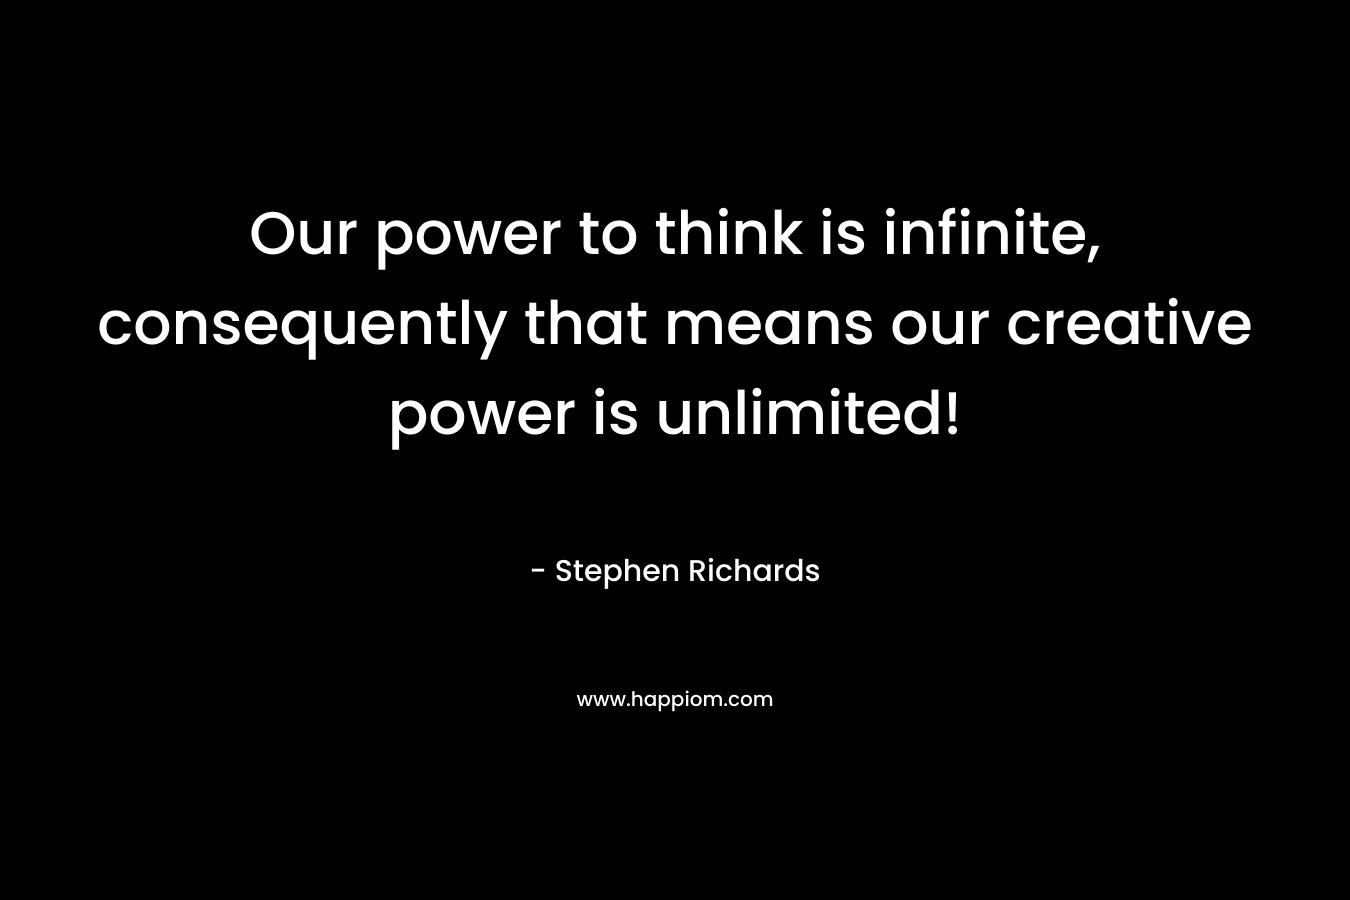 Our power to think is infinite, consequently that means our creative power is unlimited!